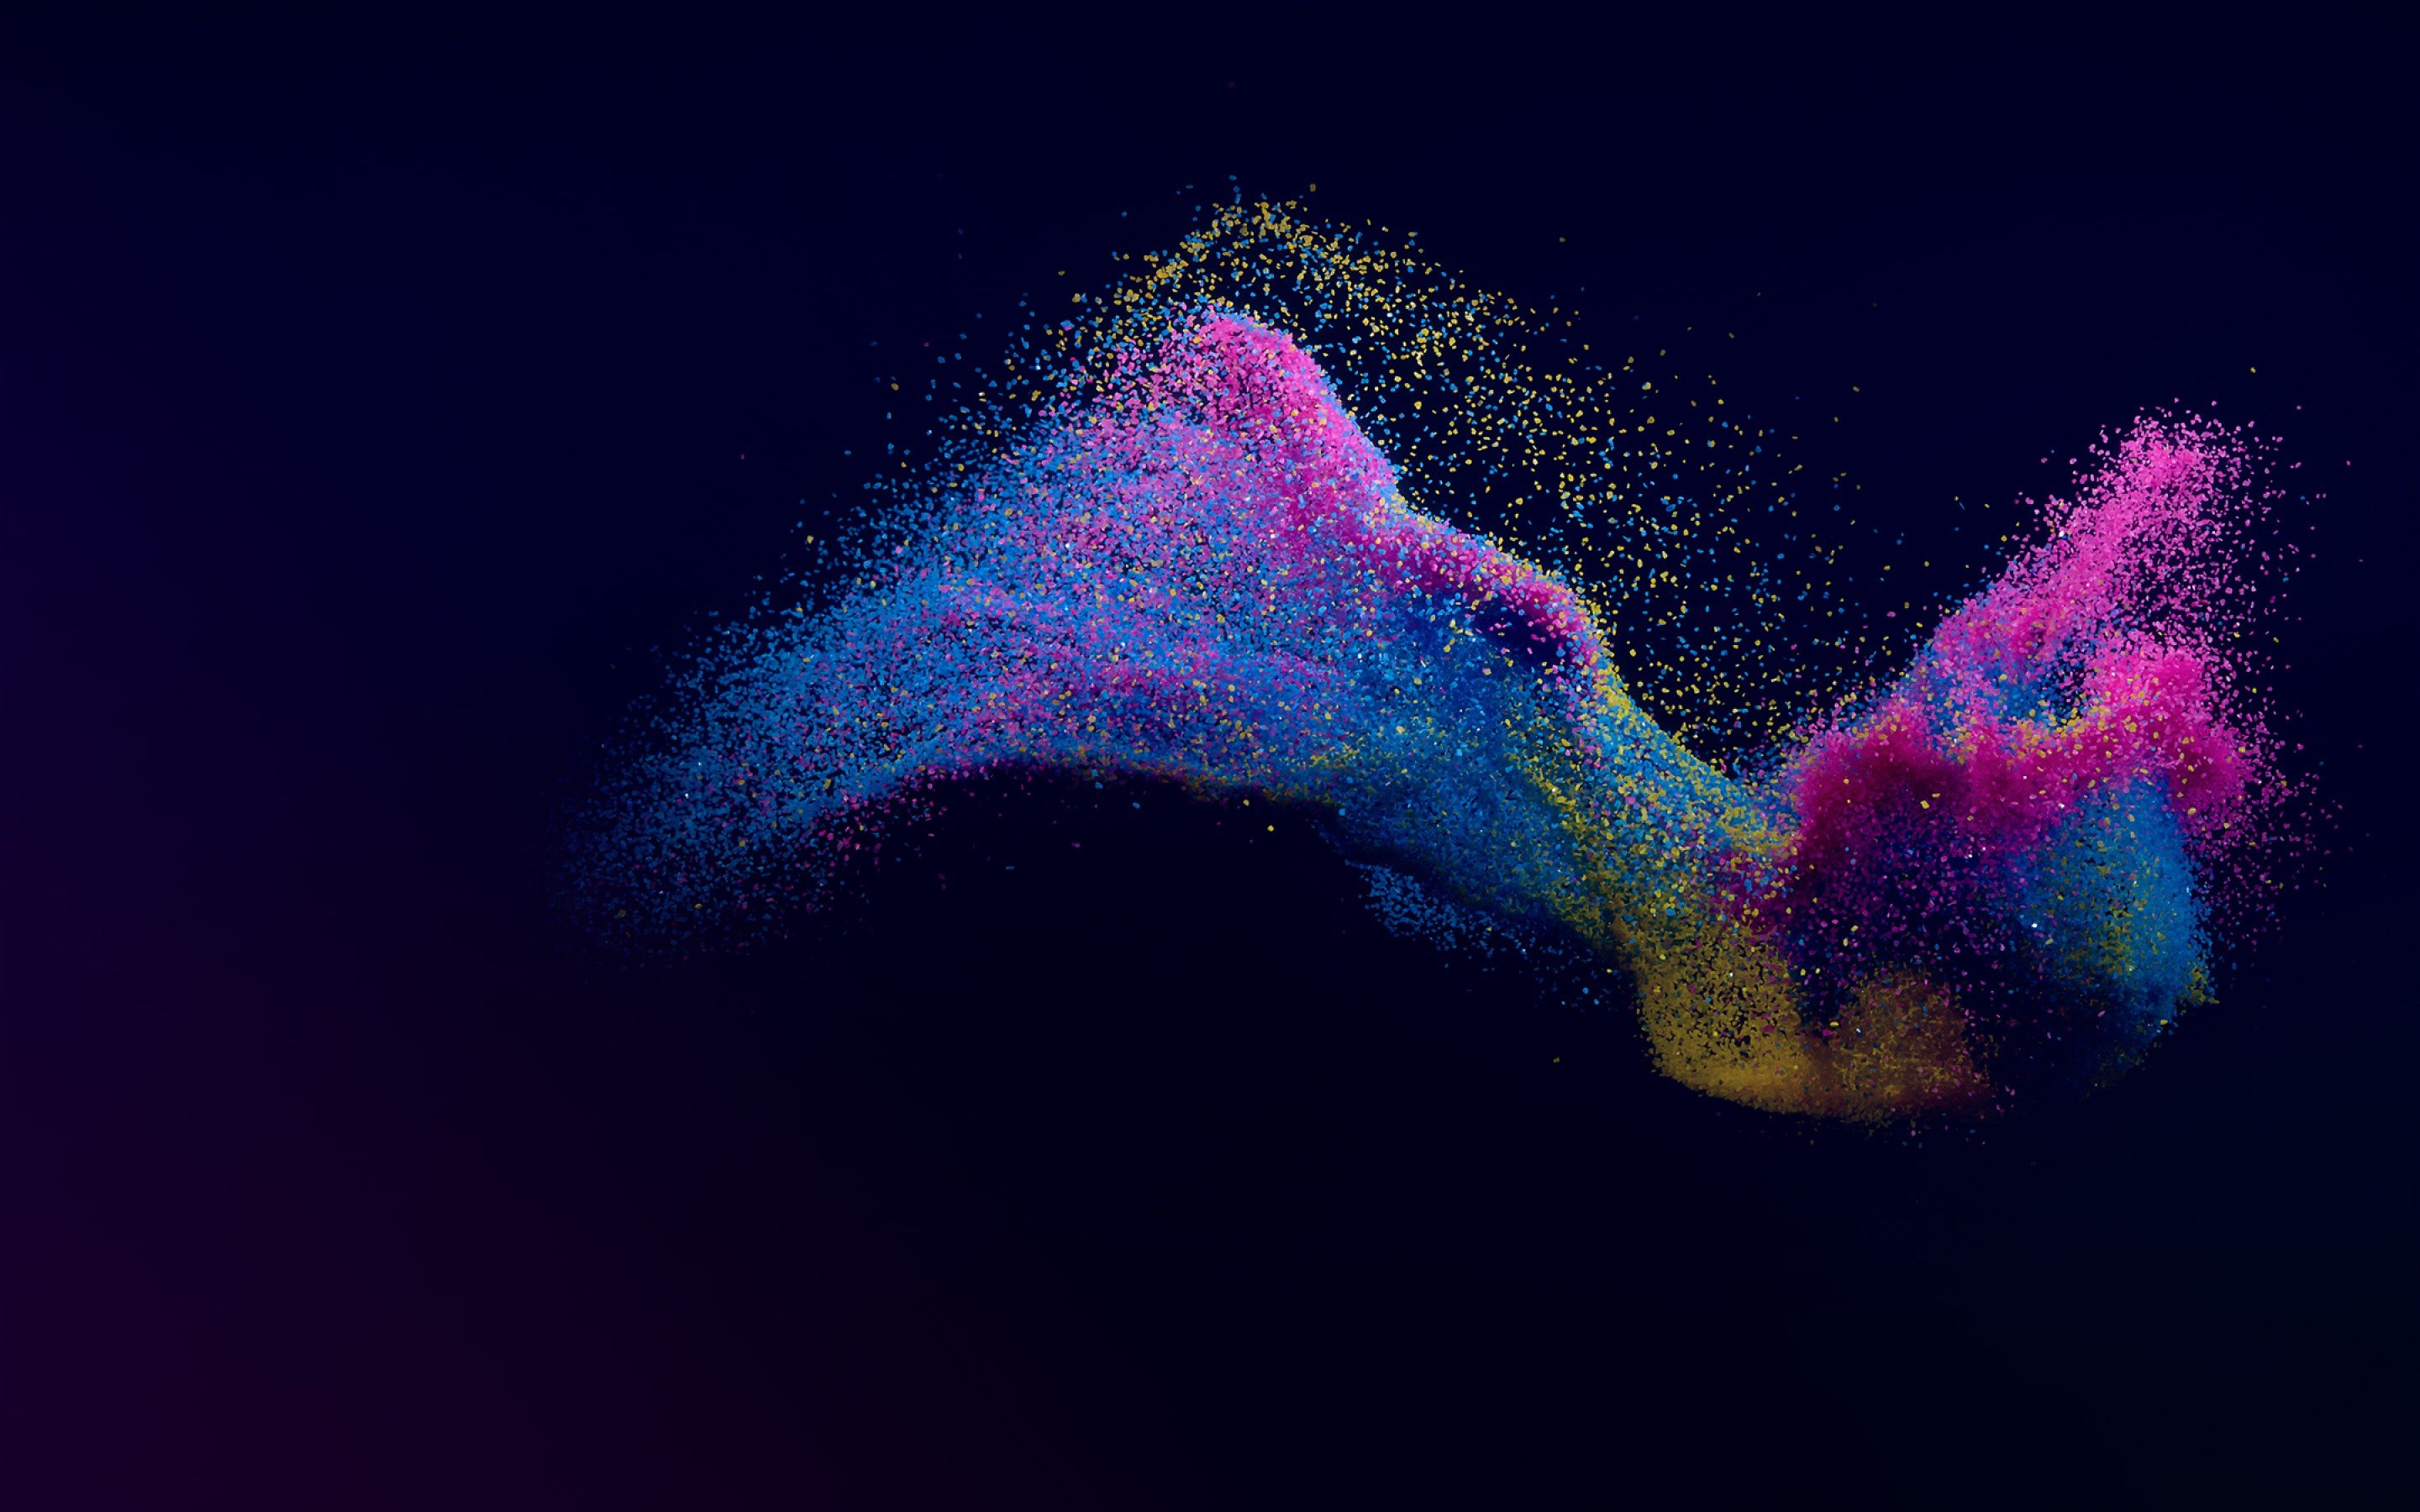  colorful  4K  wallpapers  for your desktop or mobile screen 